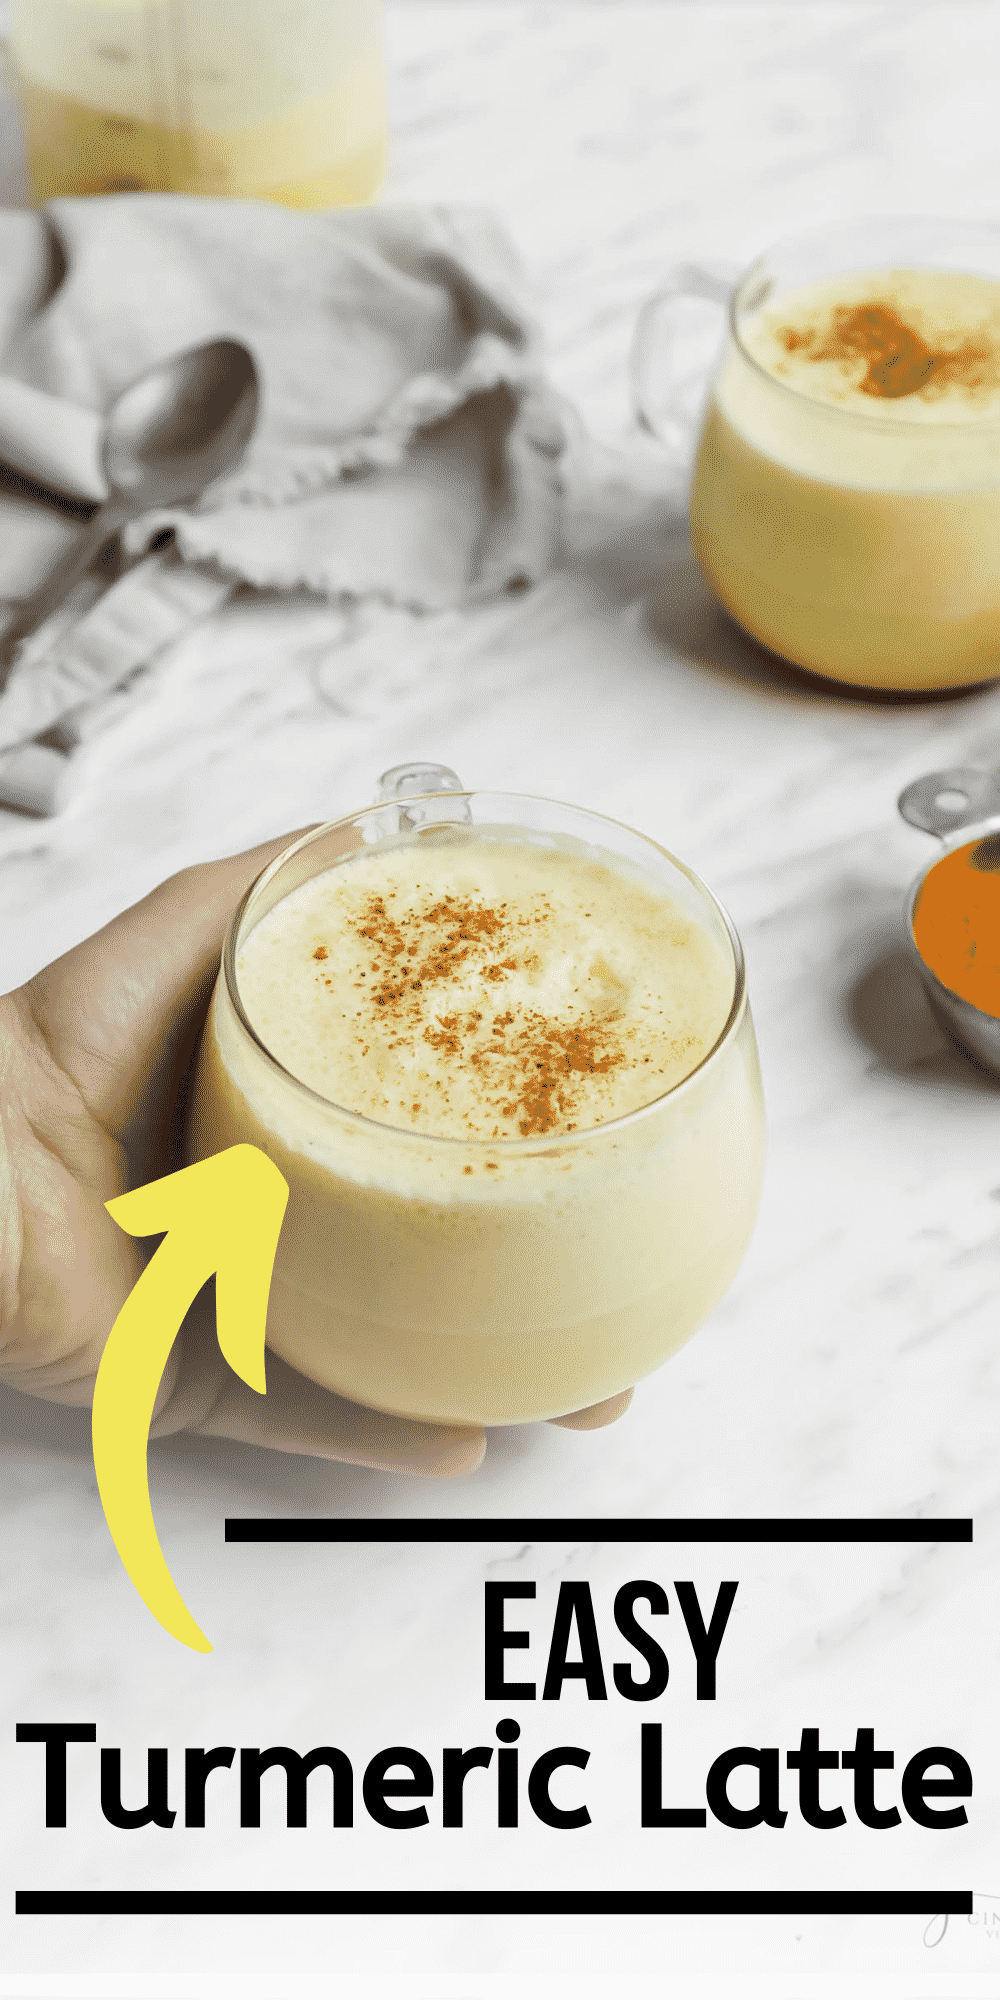 This delicious turmeric latte offers notes of cinnamon and sweet maple syrup. Add a shot of espresso to the mix and you'll have delicious Turmeric Coffee.